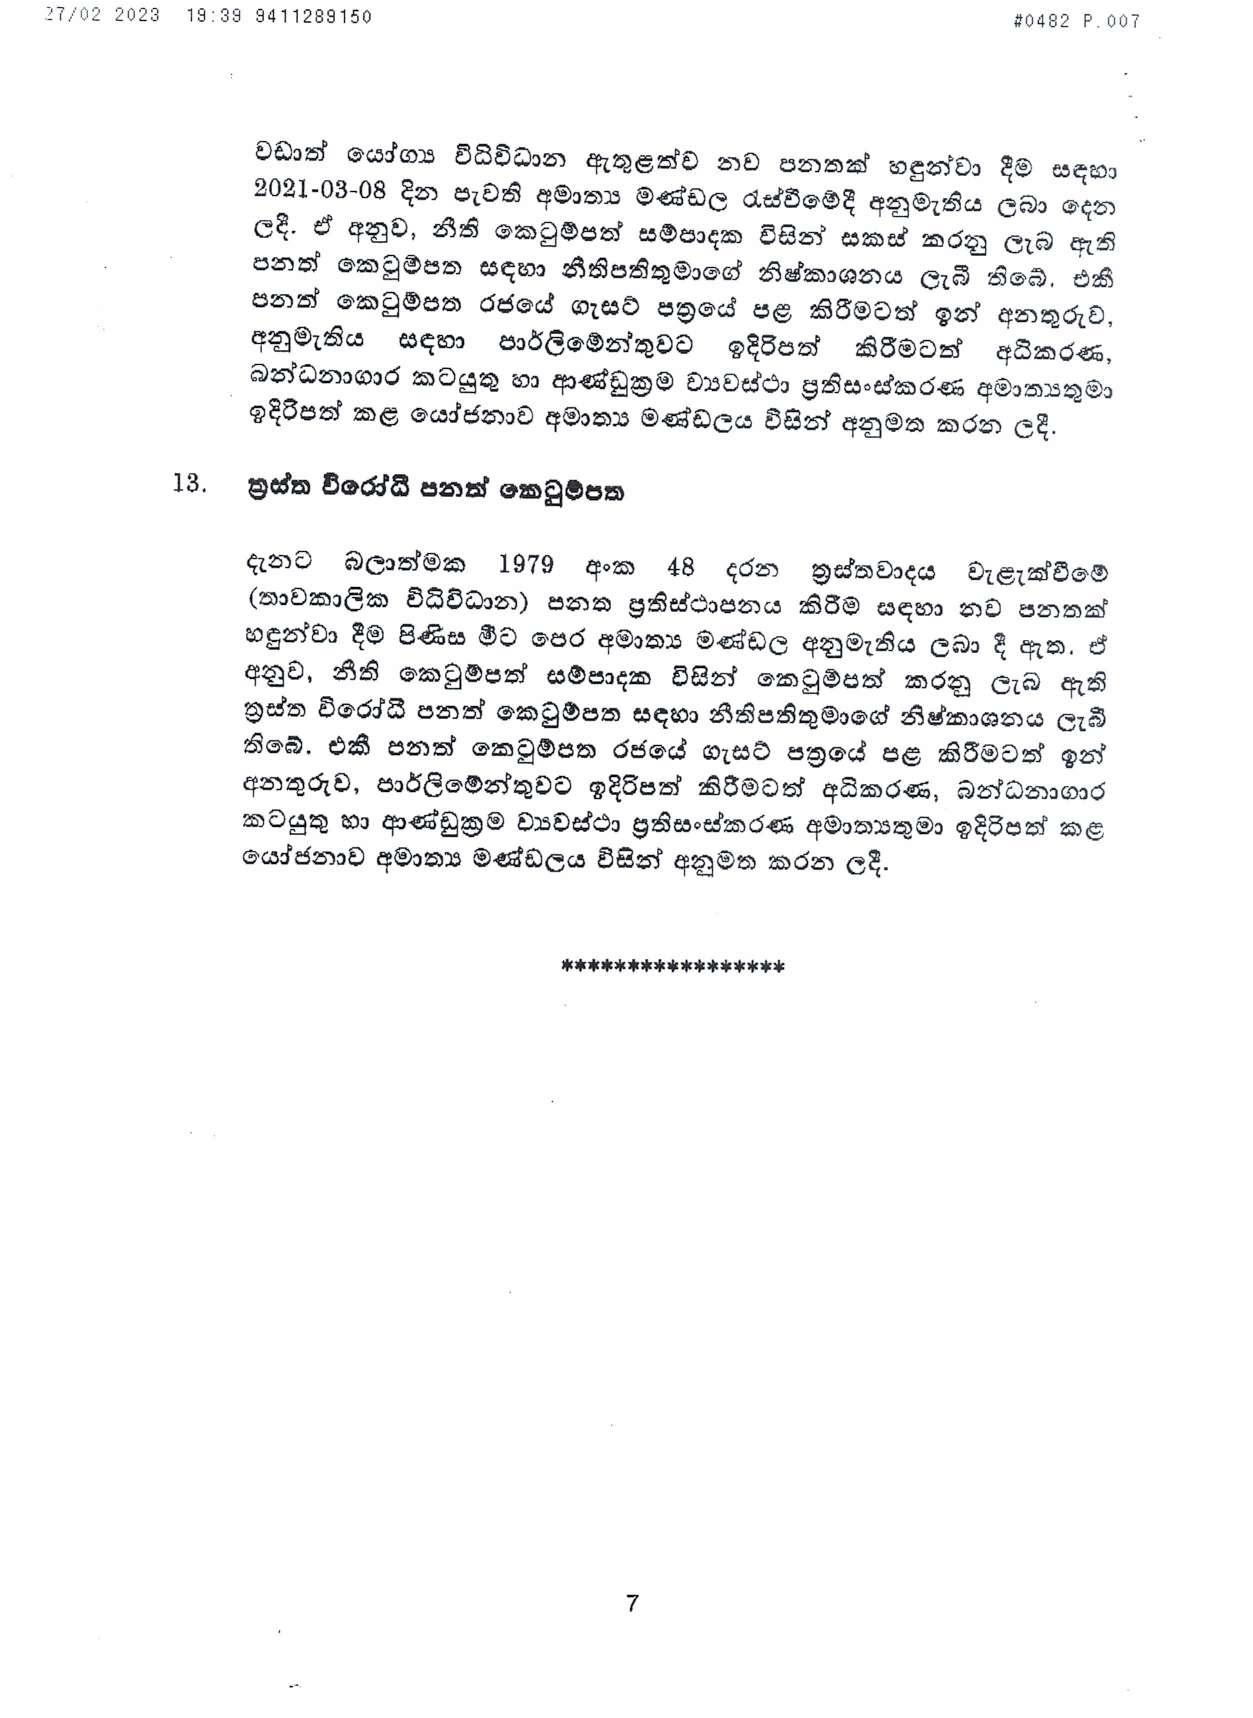 Cabinet Decision on 27.07.2023 1 page 007